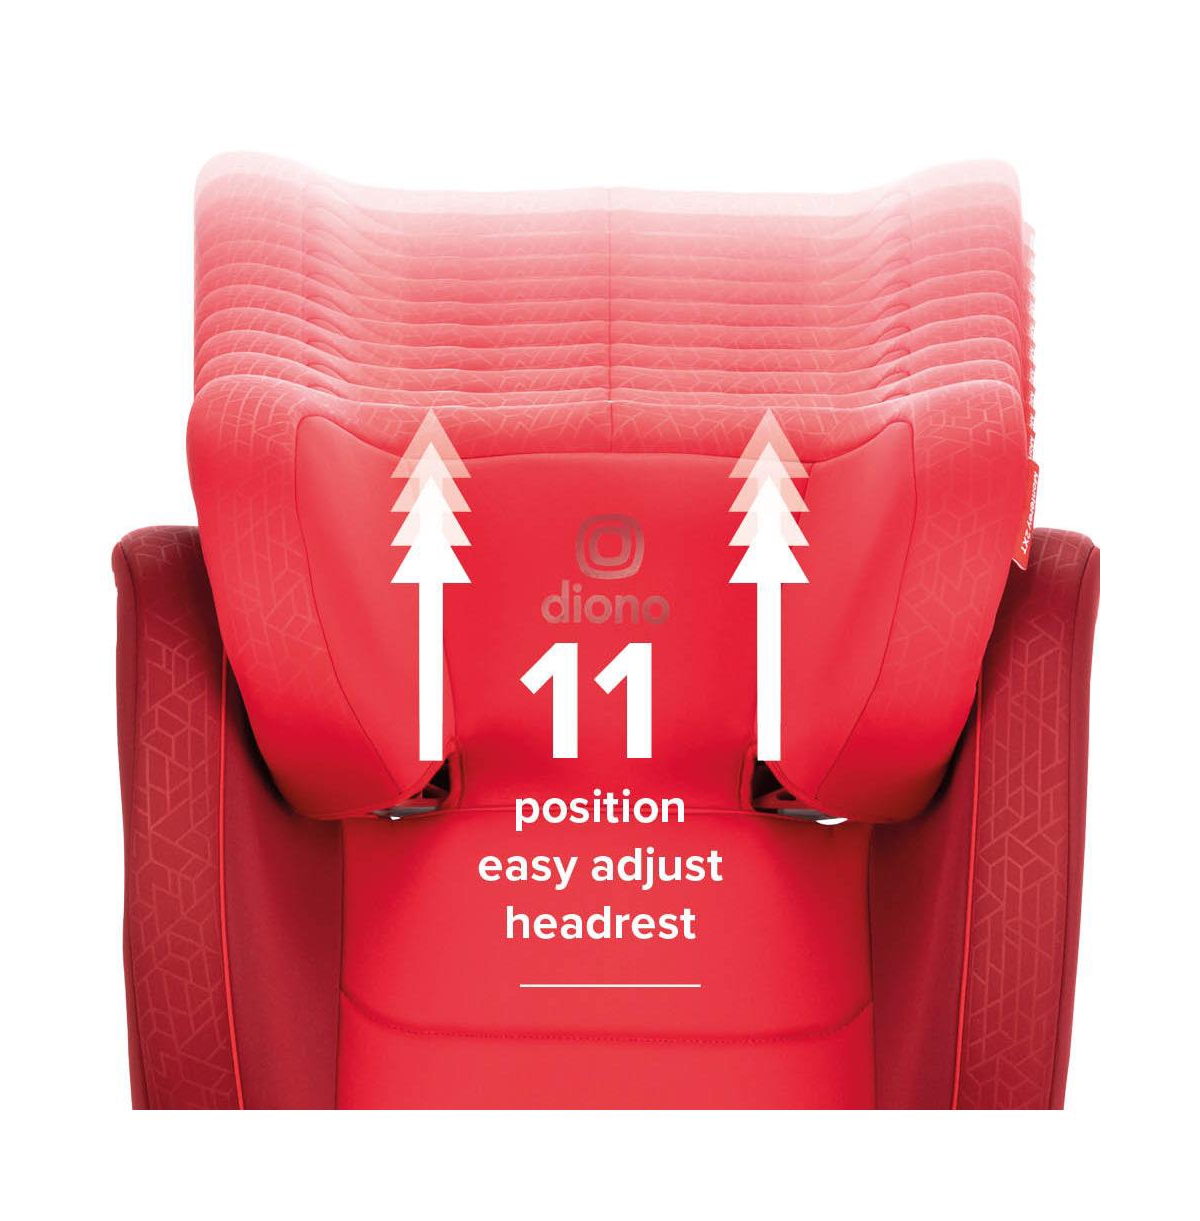 Diono Monterey 2xt Latch 2-in-1 Booster Car Seat In Red